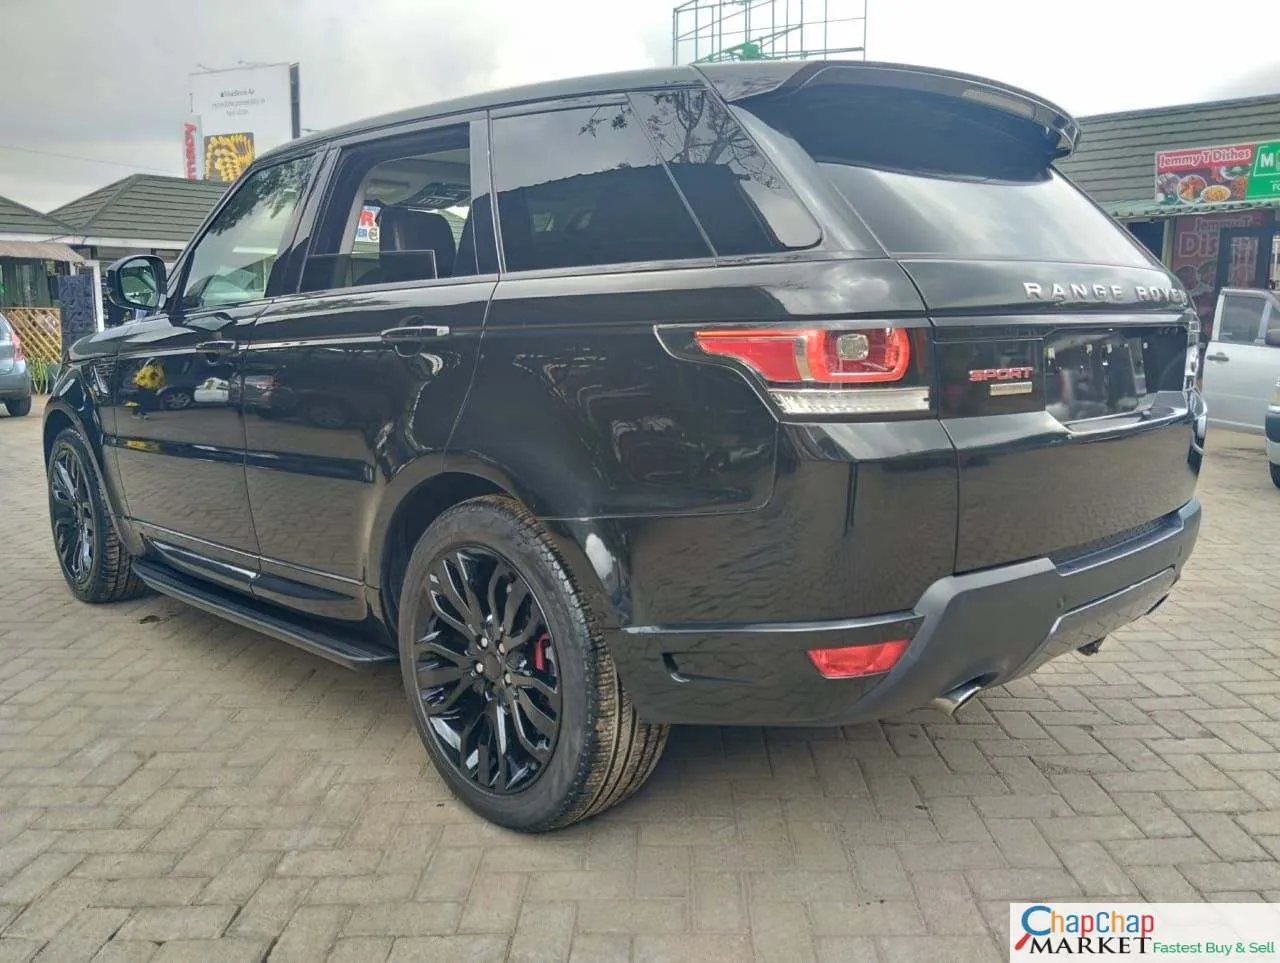 Range Rover Sport for sale in Kenya AUTOBIOGRAPHY You pay 30% deposit Trade in OK EXCLUSIVE hire purchase installments